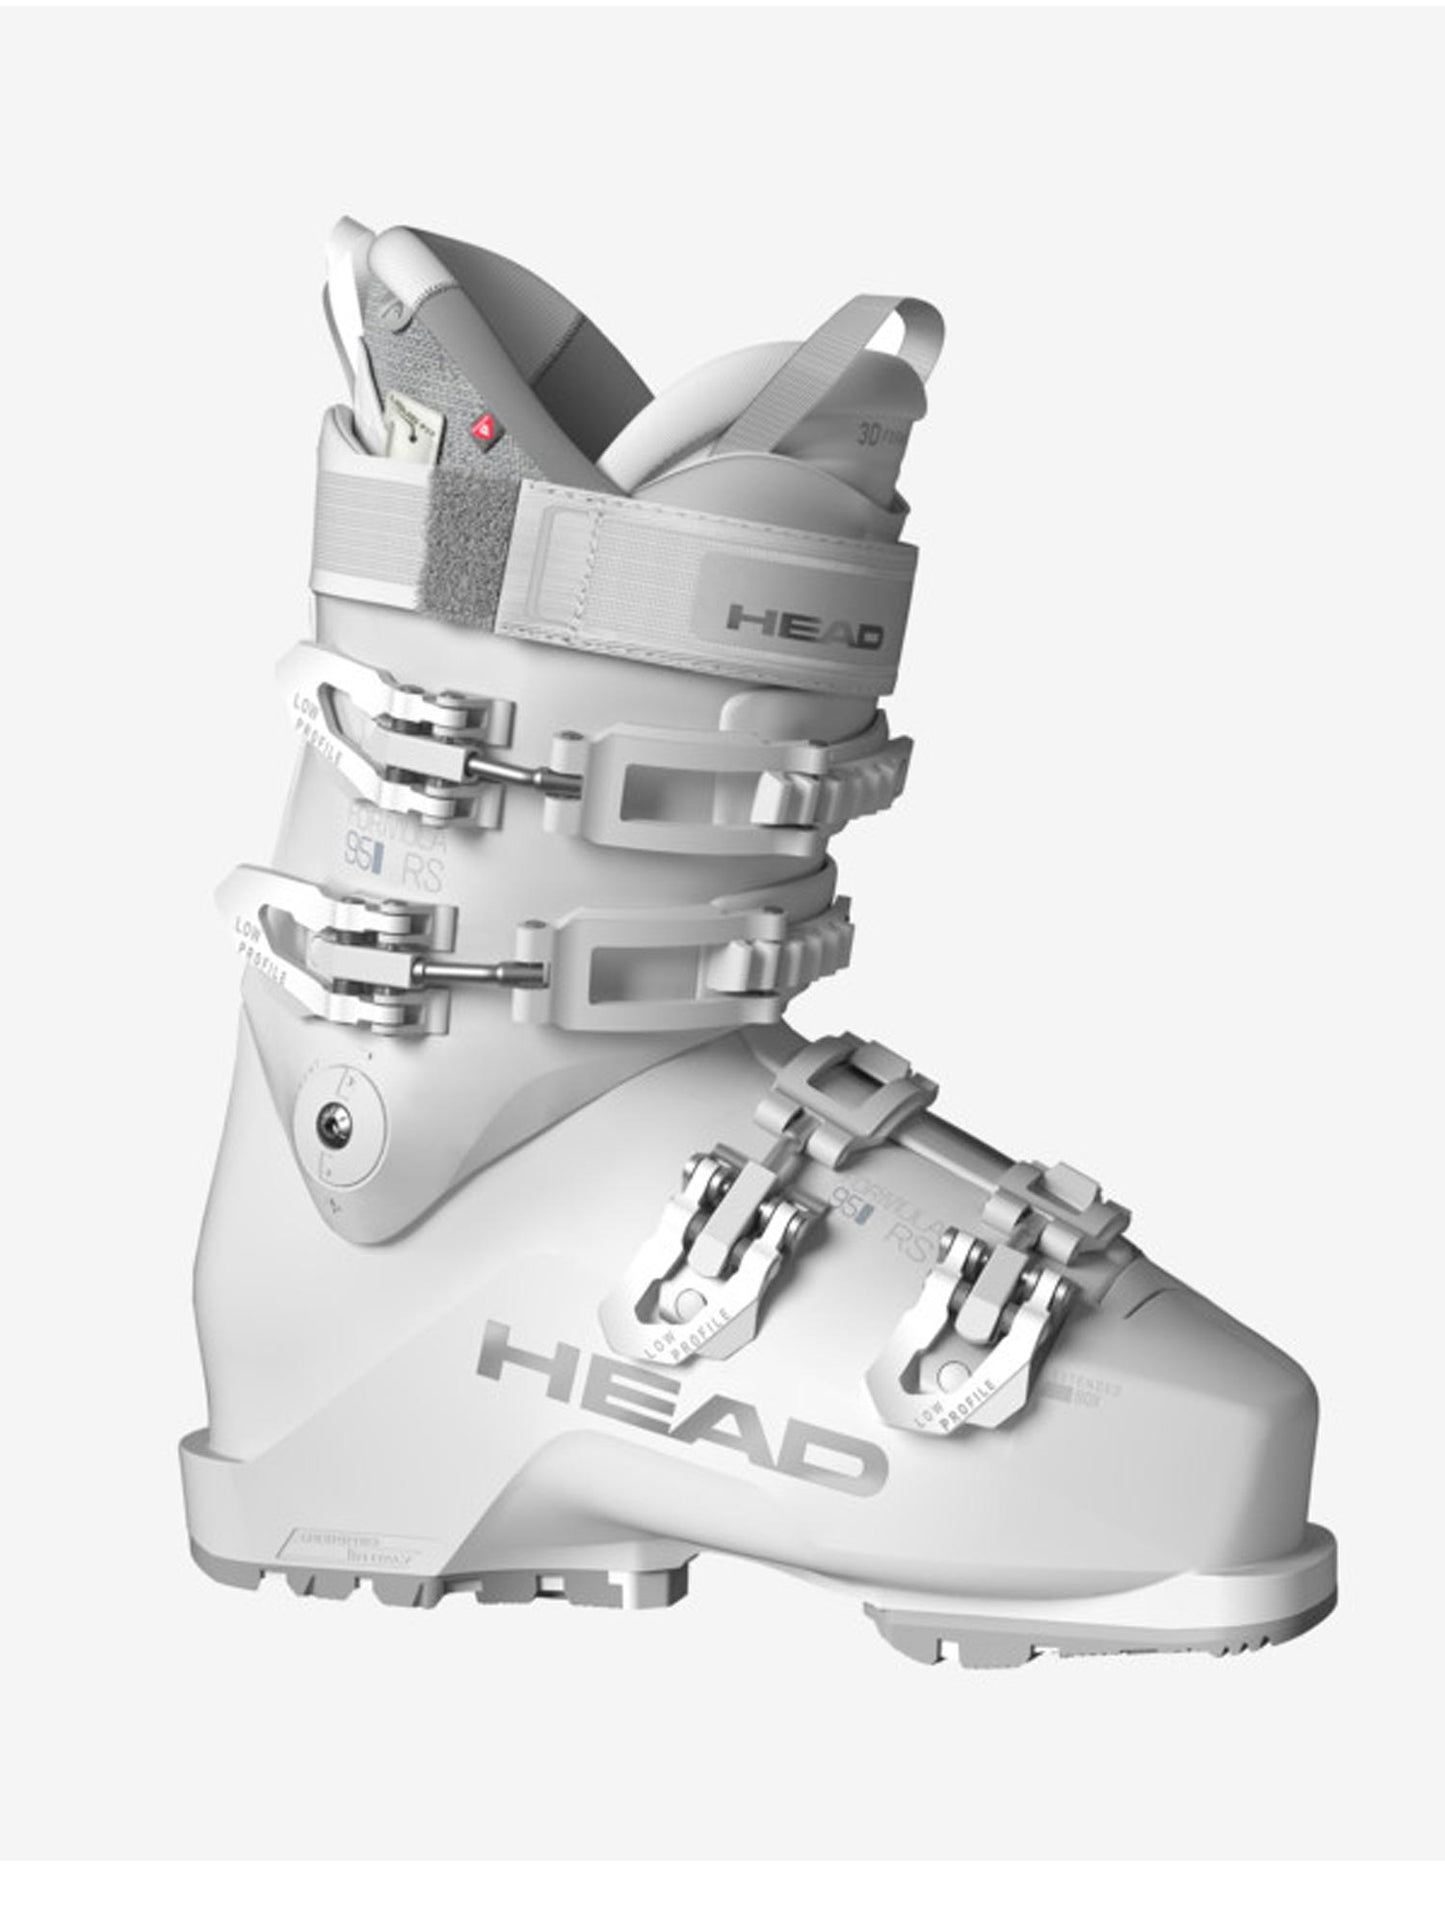 women's Head Formula RS 95 ski boots, white with silver accents